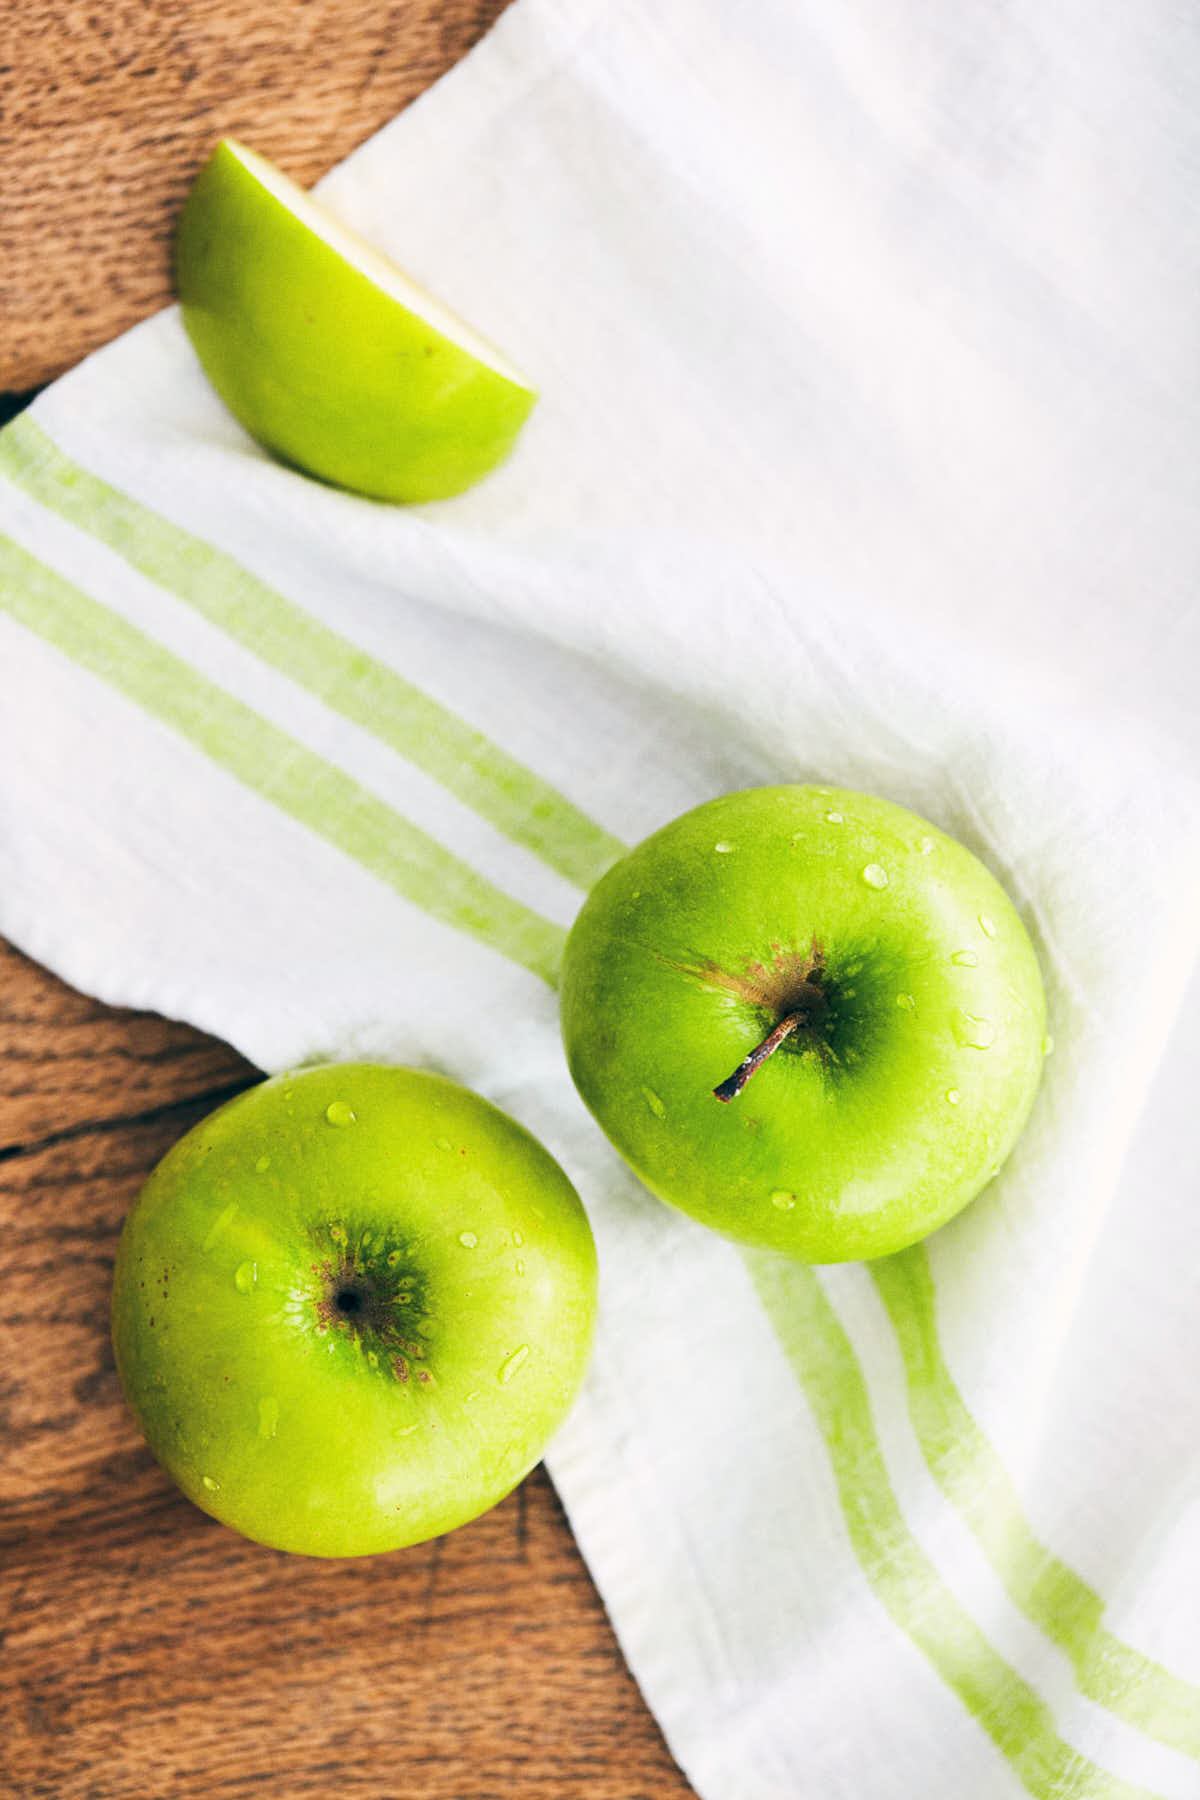 Washed green apples on a wooden table